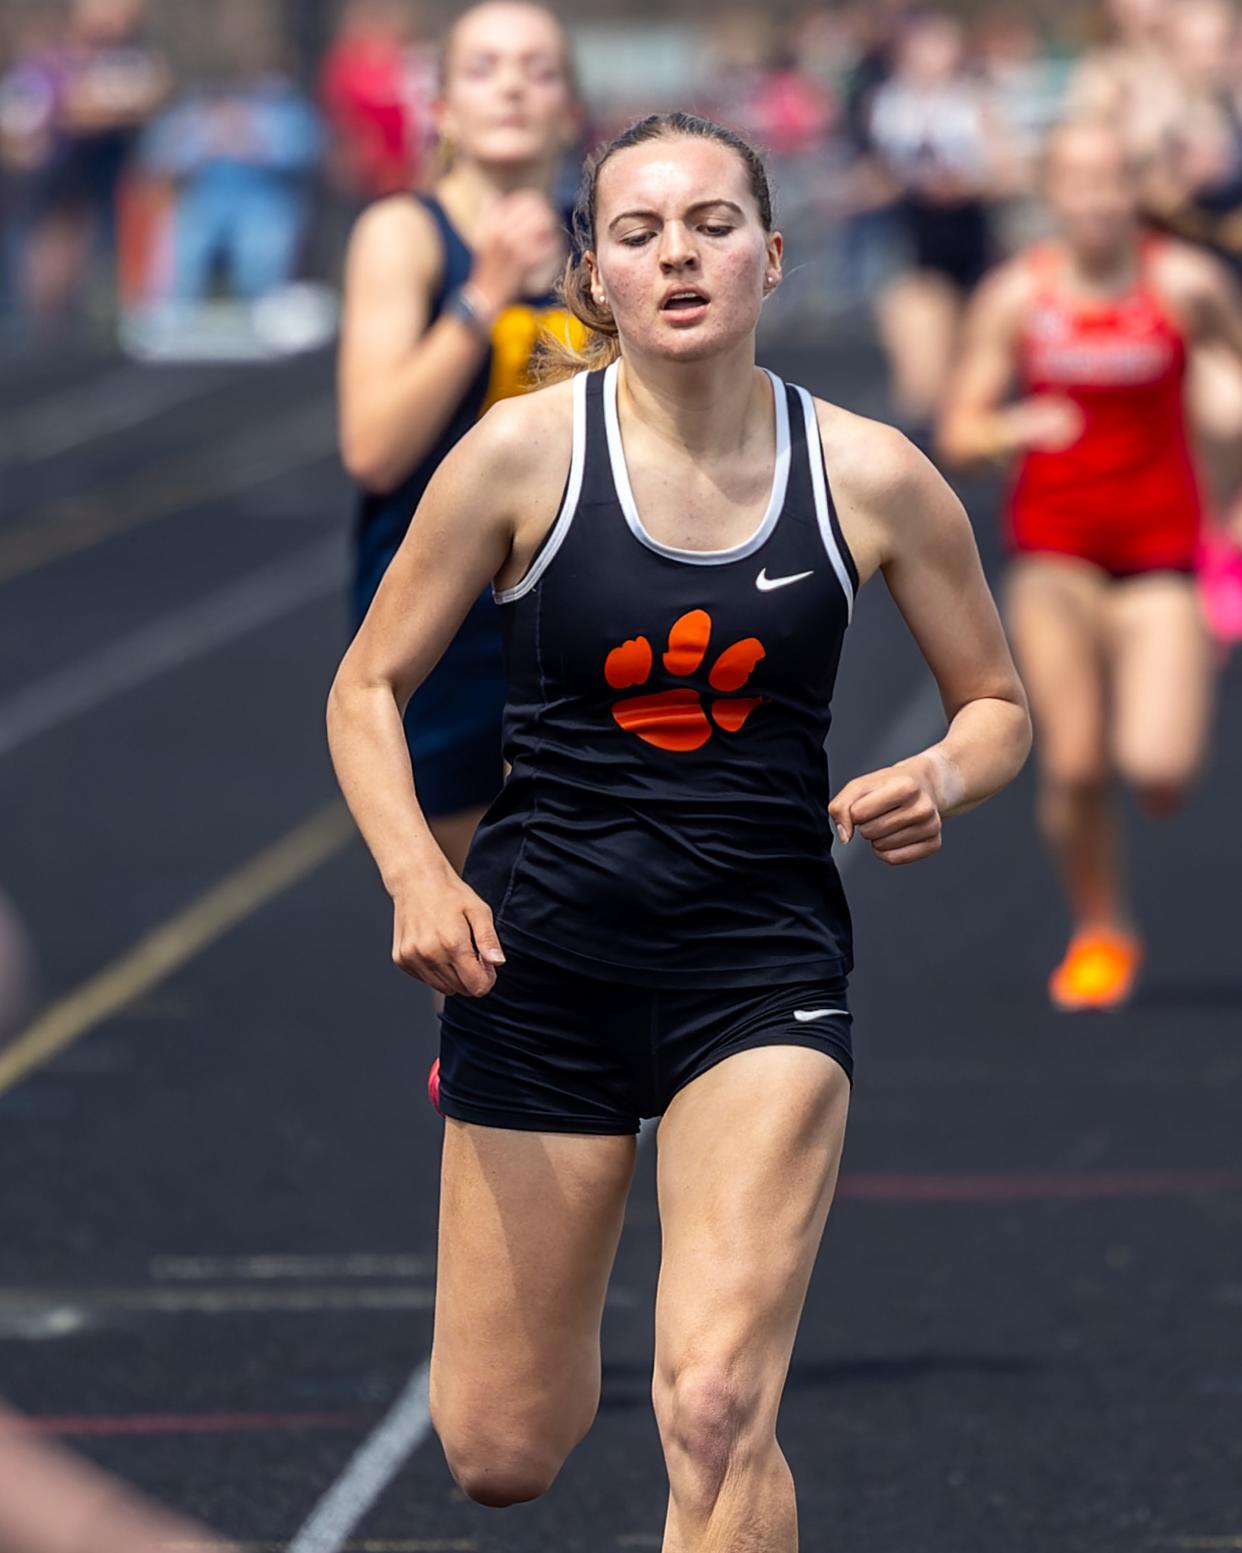 Nikki Carothers ran 10:57.98 in the 3,200-meter run at the Saline Golden Triangle meet, ranking her fourth in Brighton history for that event.